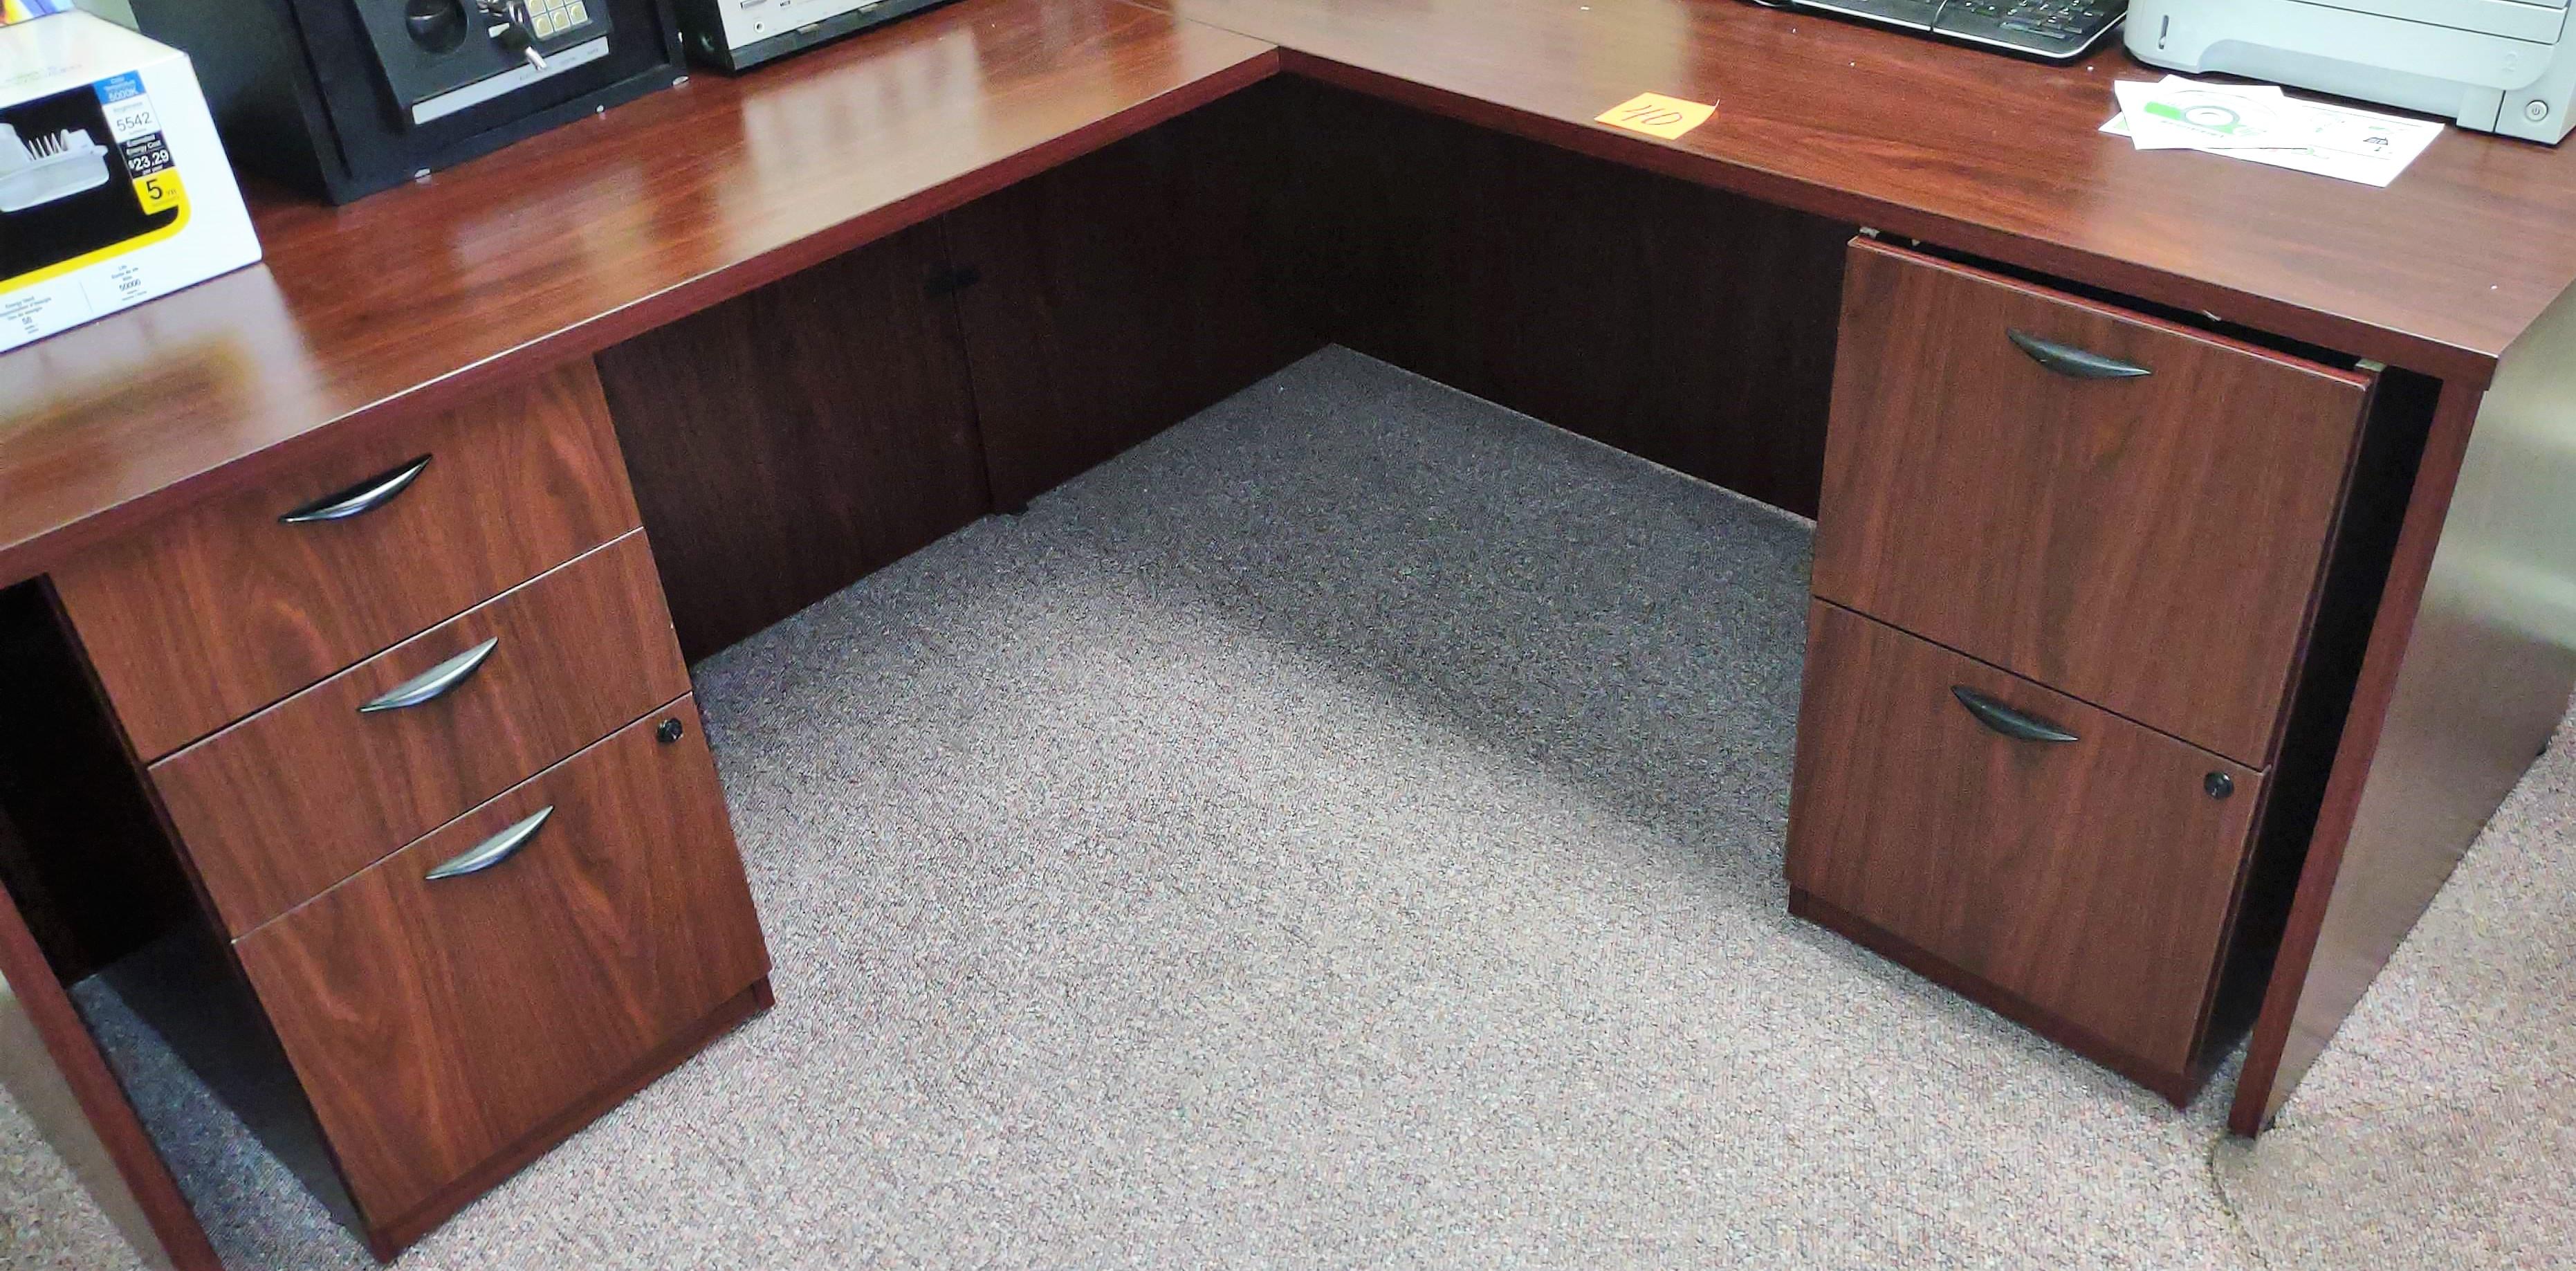 GOOD LOOKING "L" SHAPE OFFICE DESK (PARTICAL BOARD) PICK UP ONLY